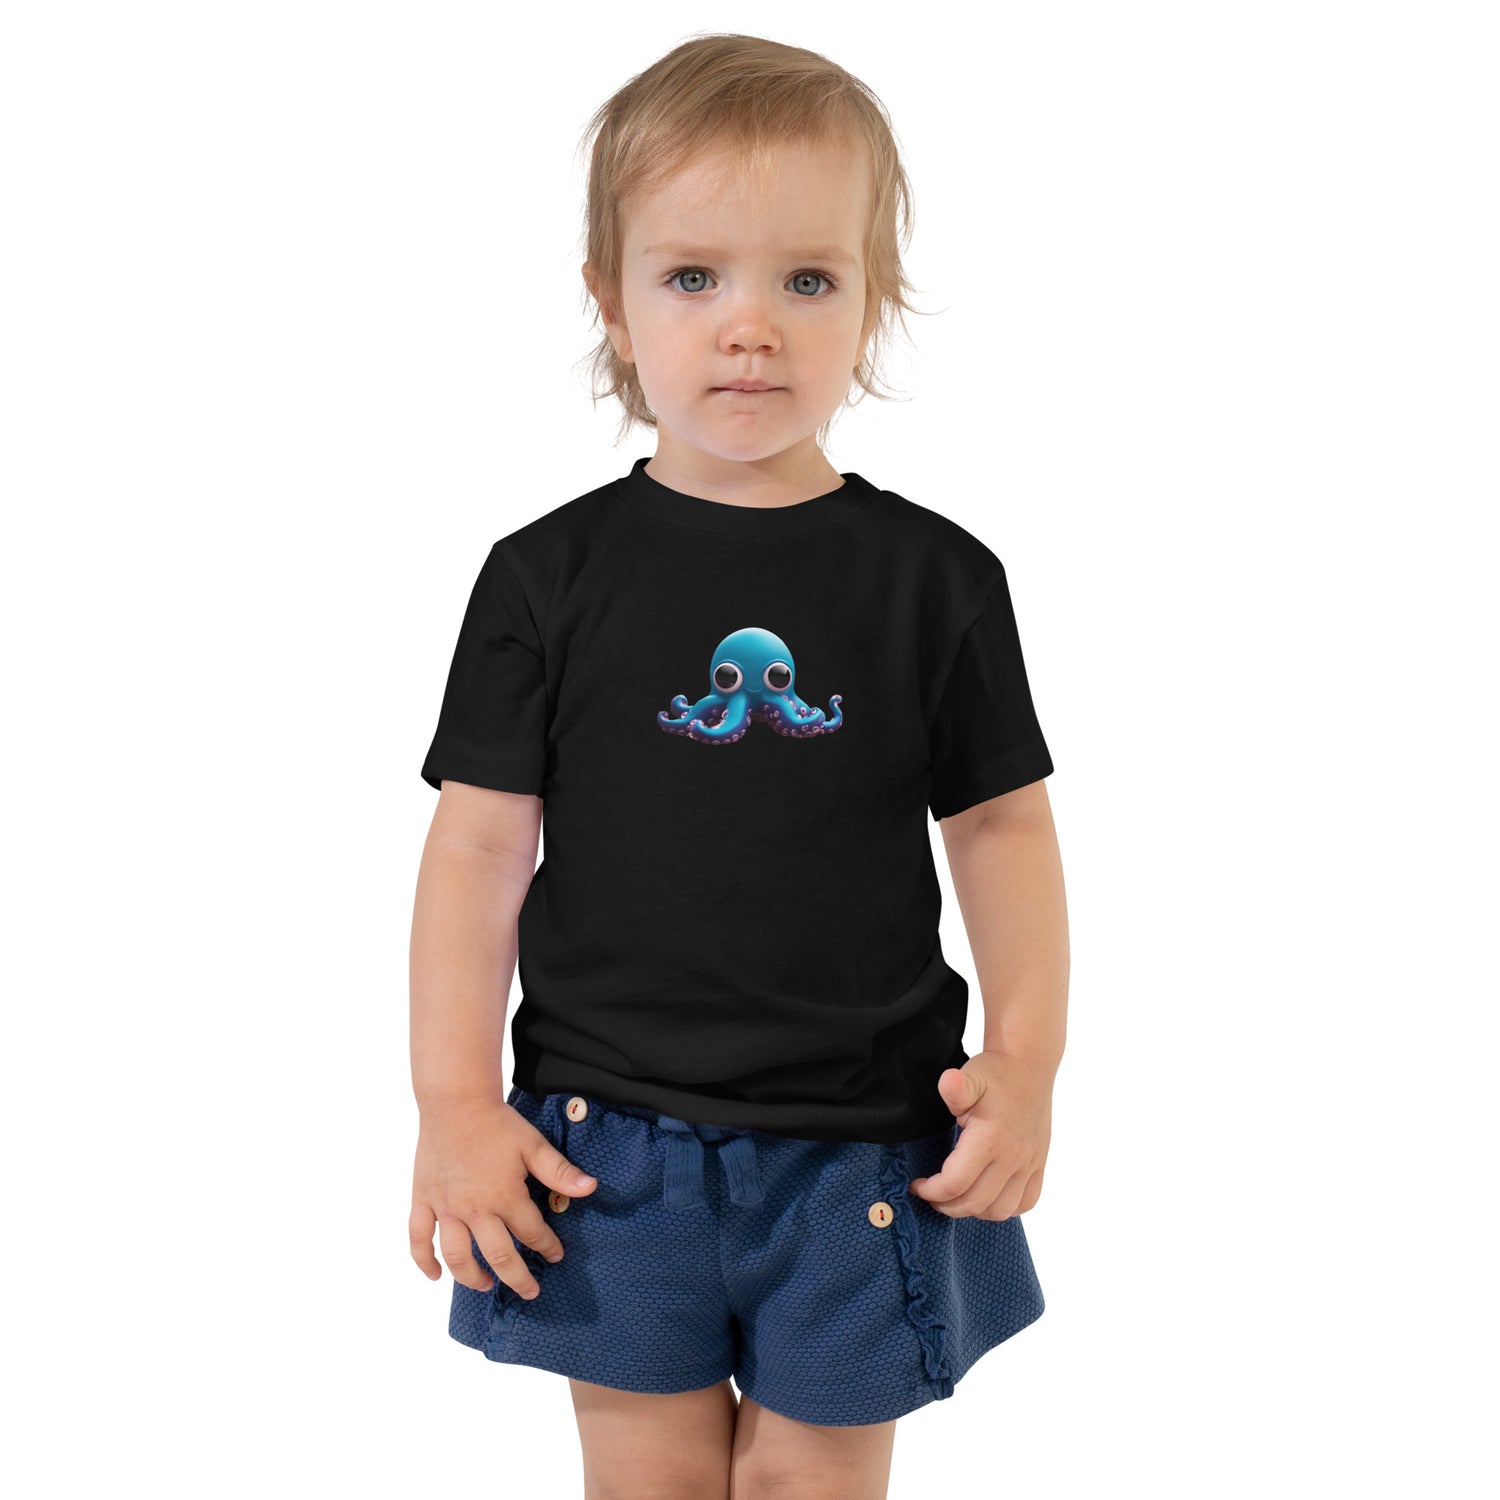 Cheerful Octo-Pal Tee for Toddlers